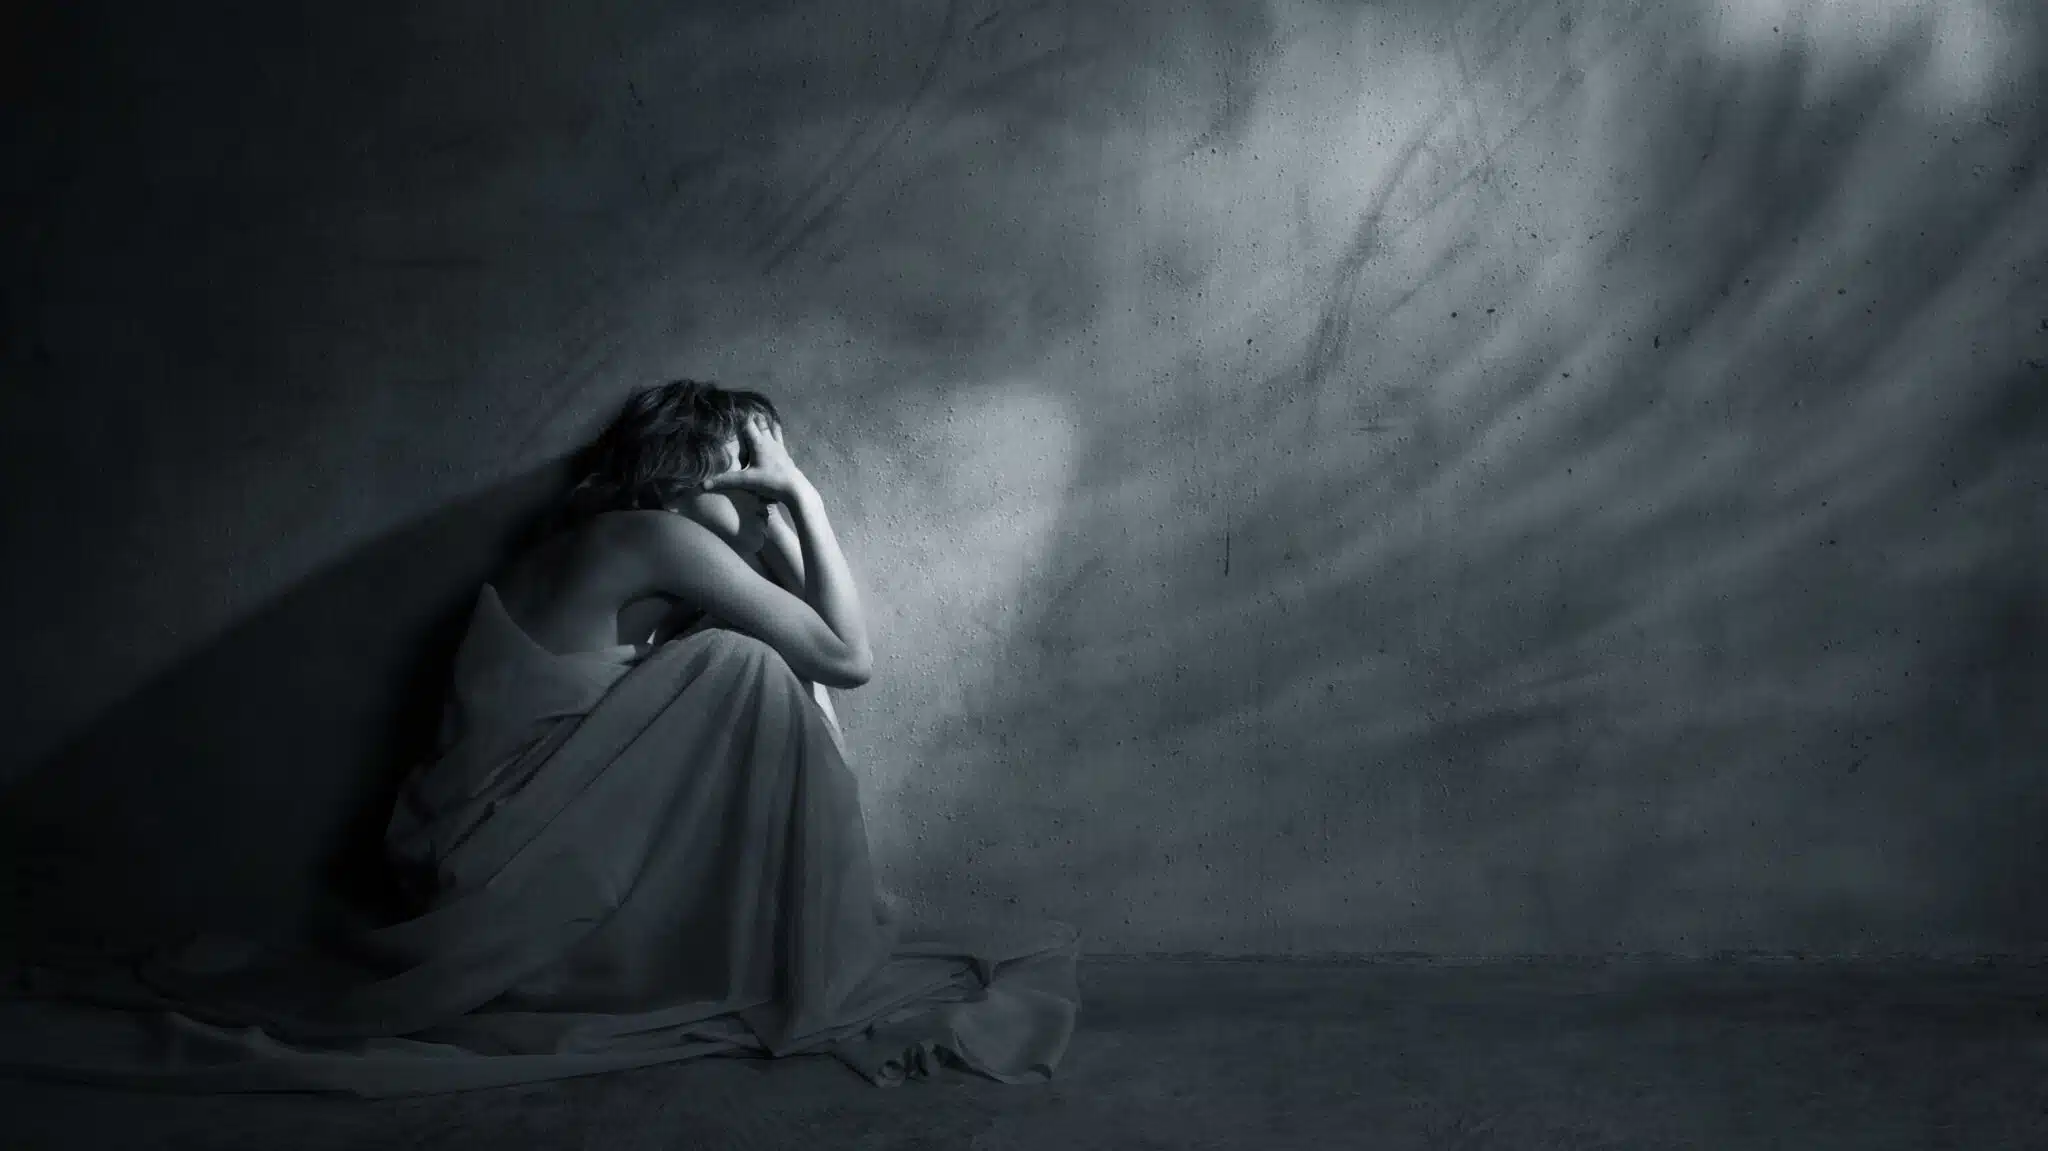 A woman sits alone on the floor in a dark room - Suicide Risks & Prevention In Early Recovery